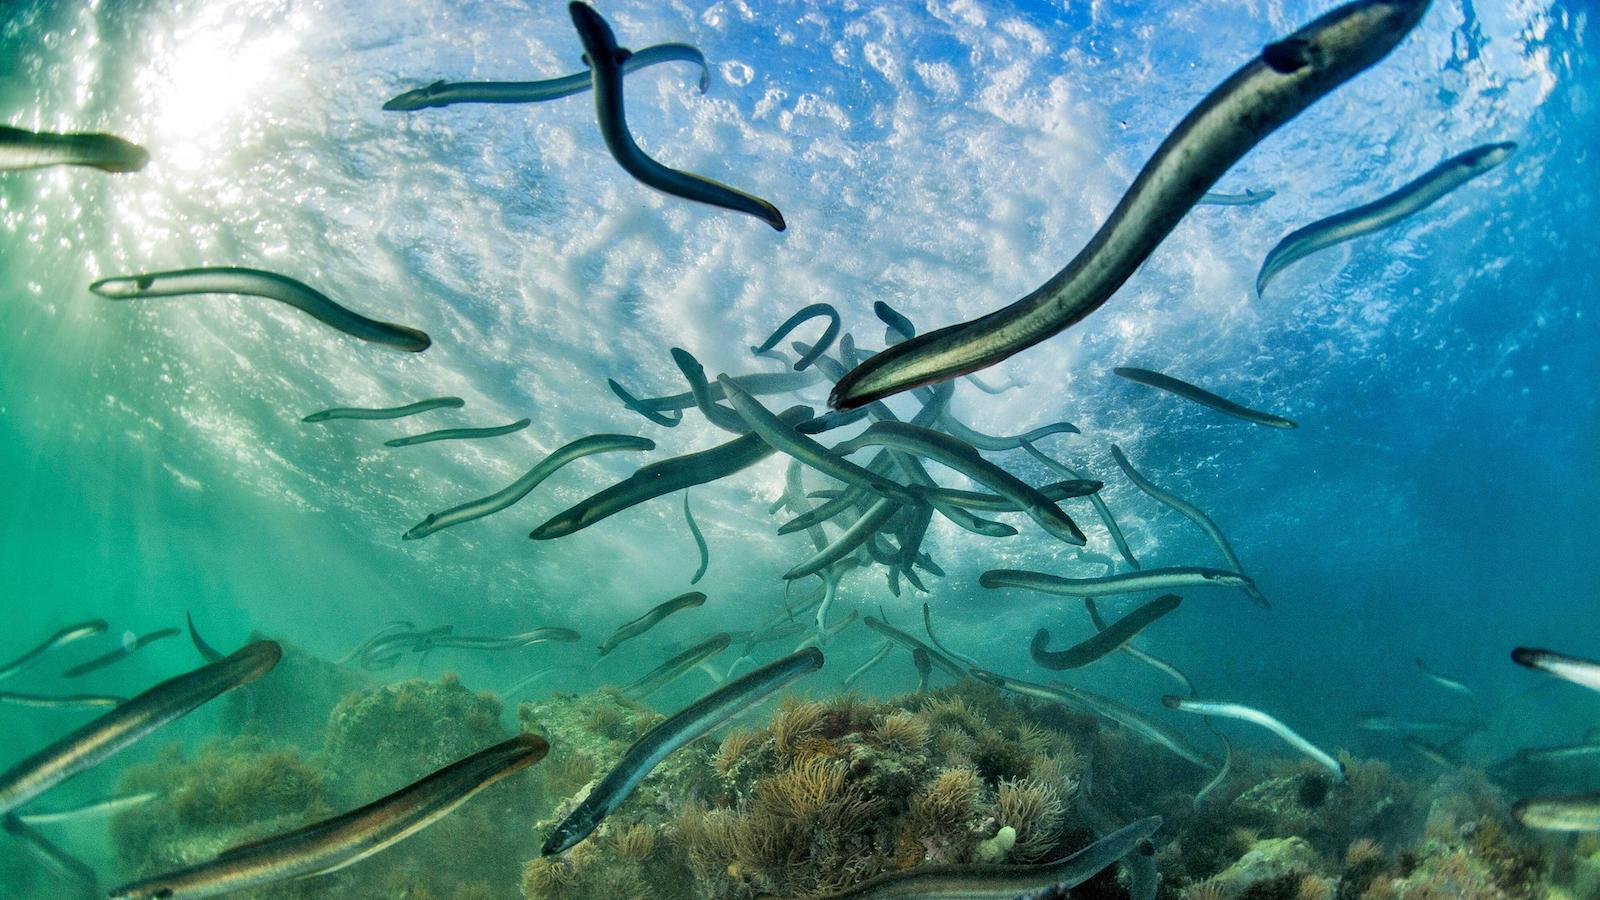 photo of Dire Straits: Can a Fishing Ban Save the Elusive European Eel? image